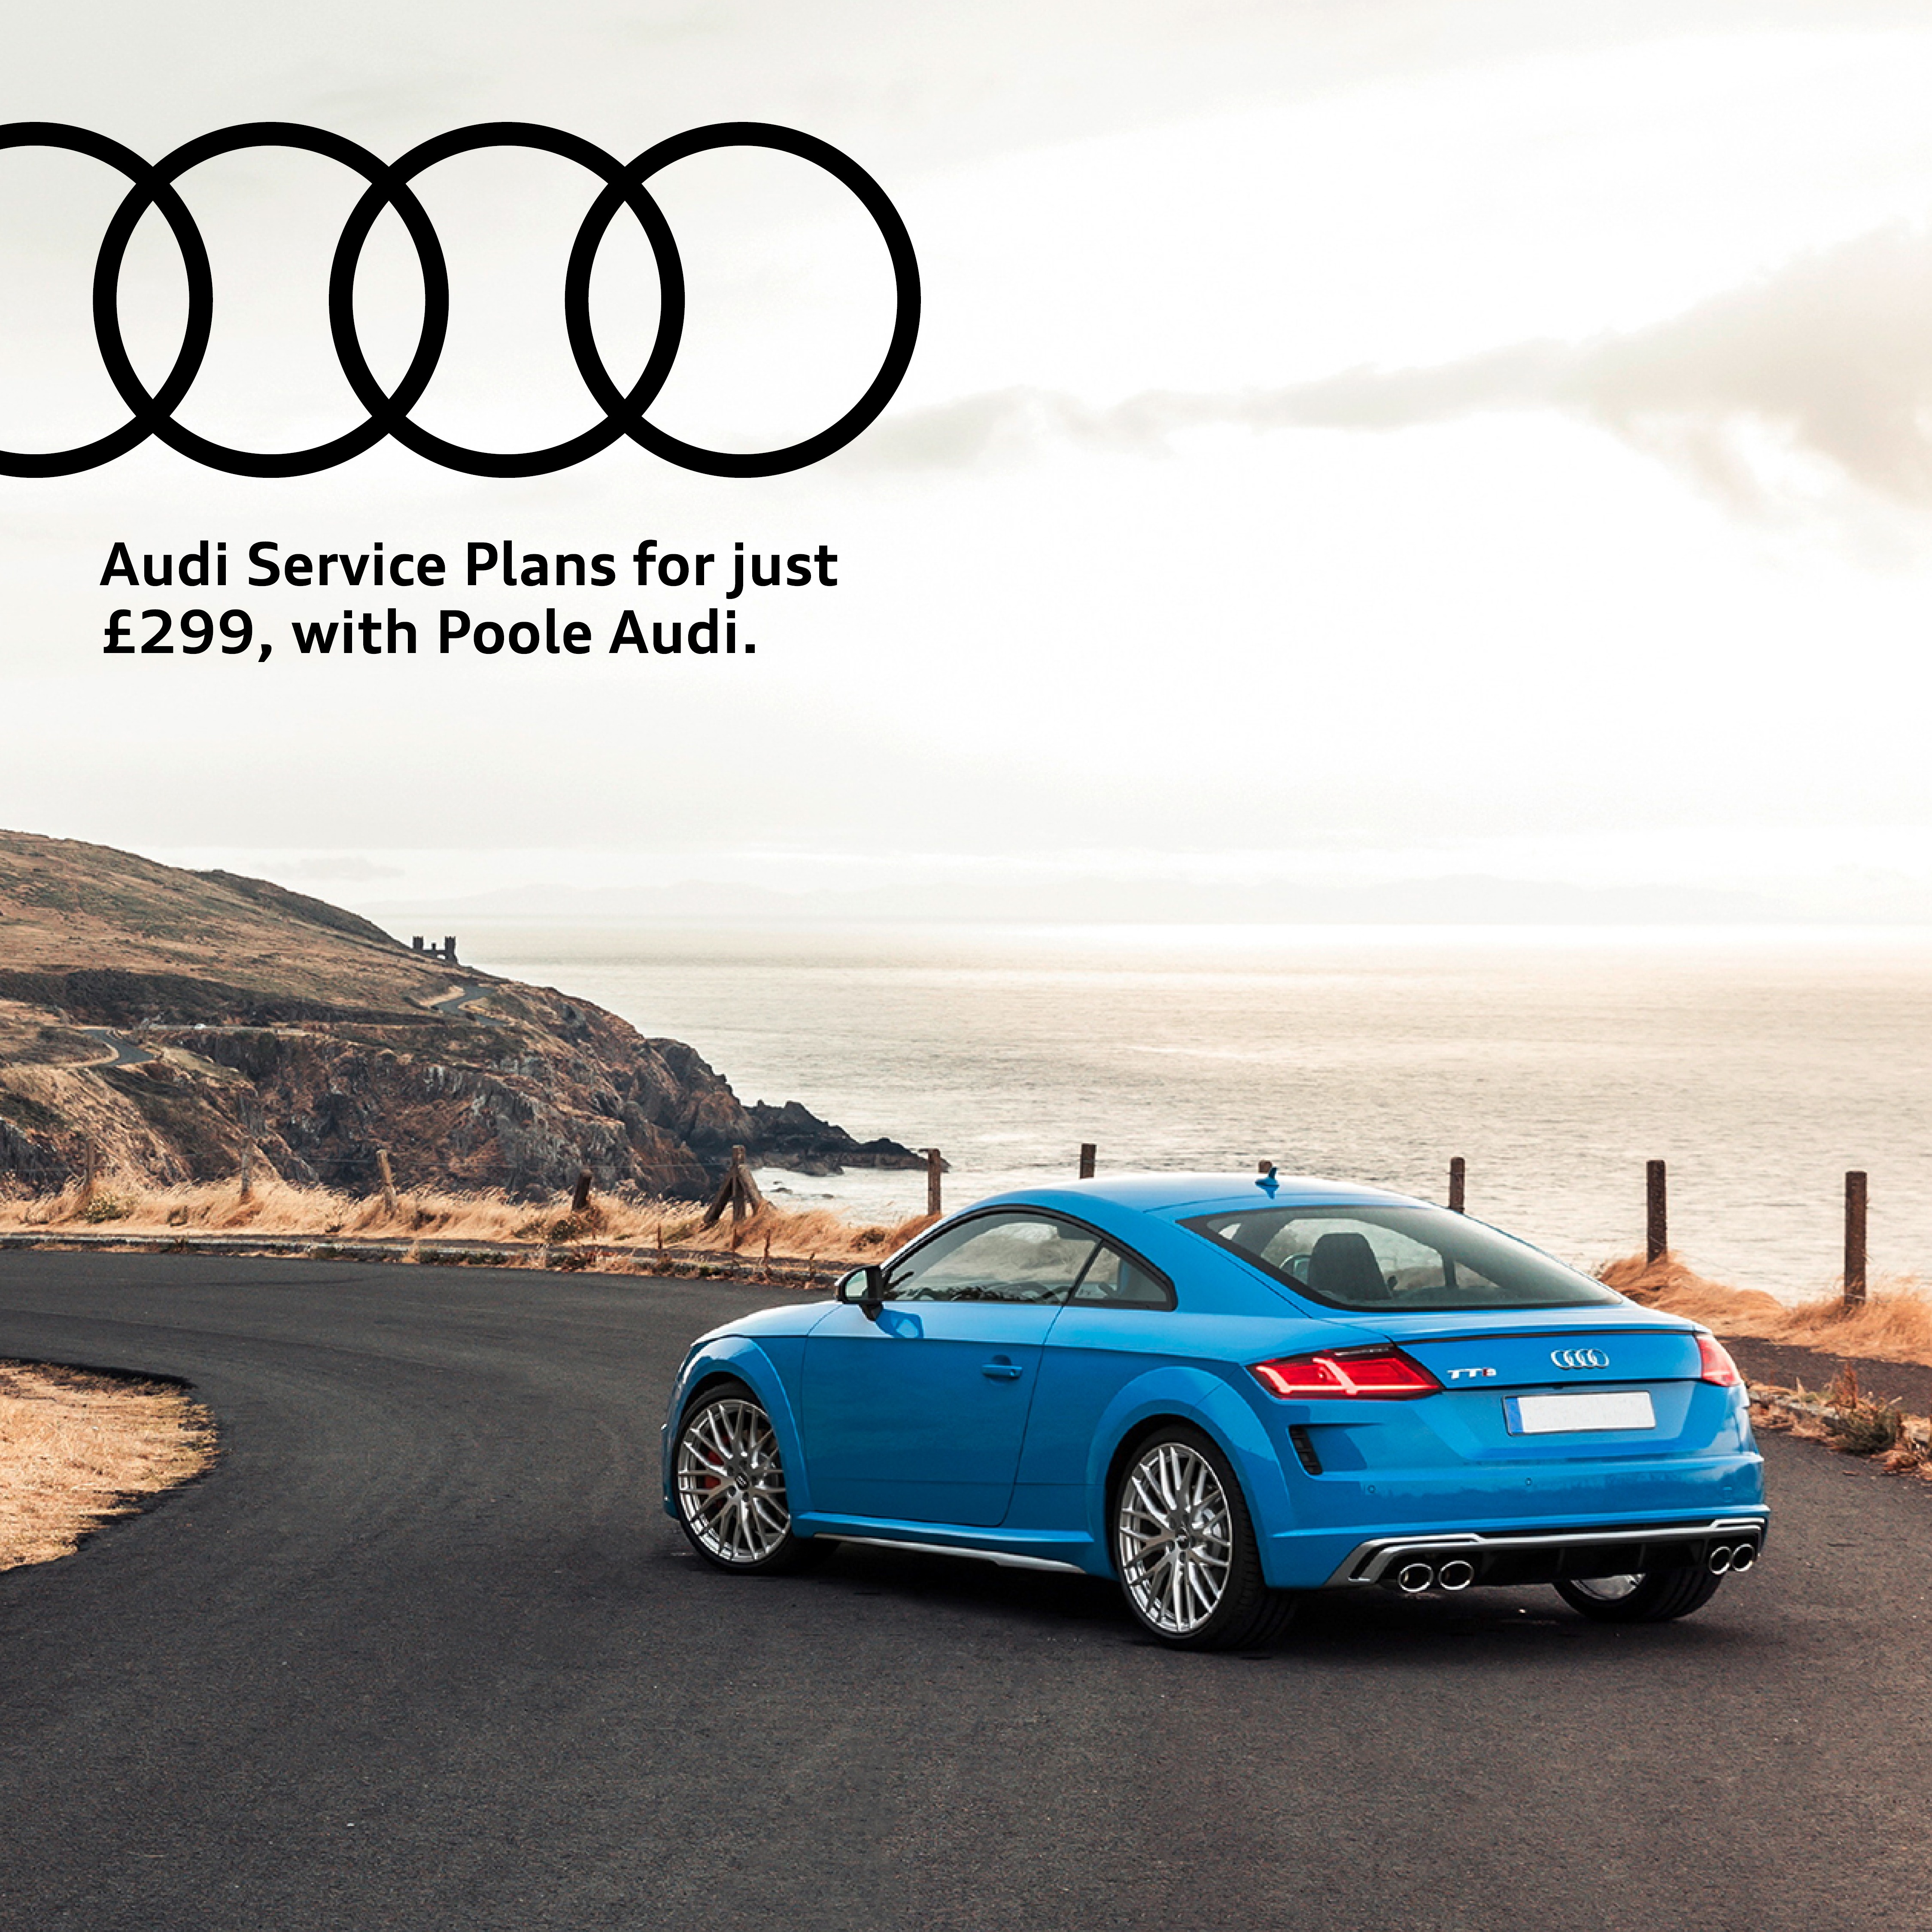 Two Services for just £299 with Poole Audi